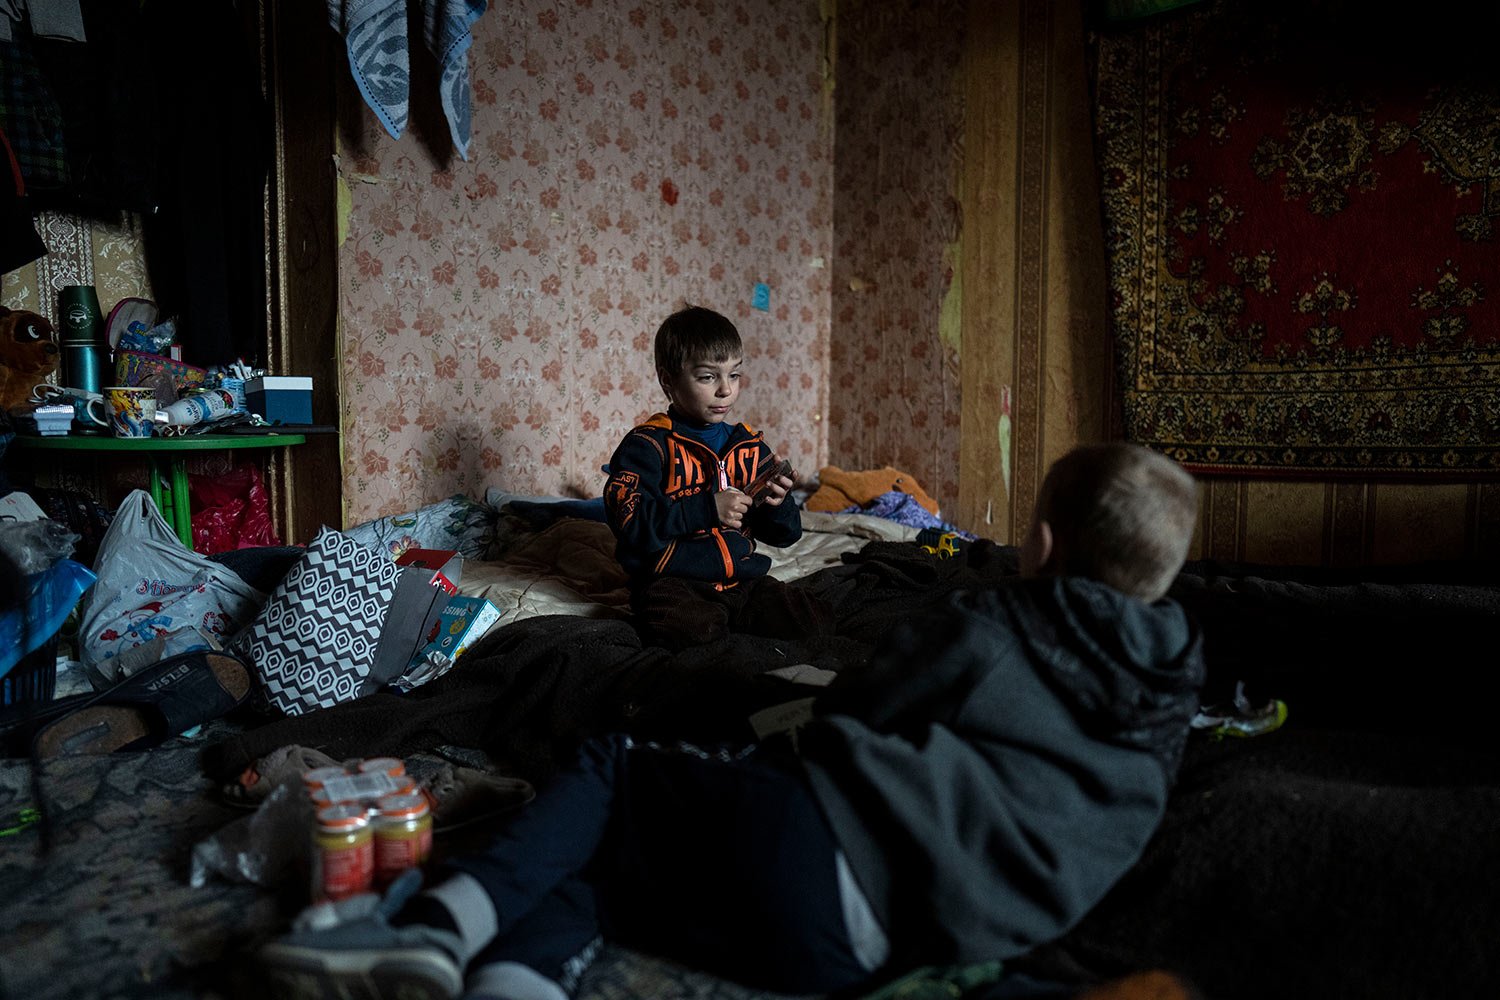  Vlad, 6, plays cards with a friend inside his house in Bucha, in the outskirts of Kyiv, Ukraine, Saturday, April 9, 2022. Vlad's mother died during their confinement in a basement for more than a month during the occupation of the Russian army. (AP 